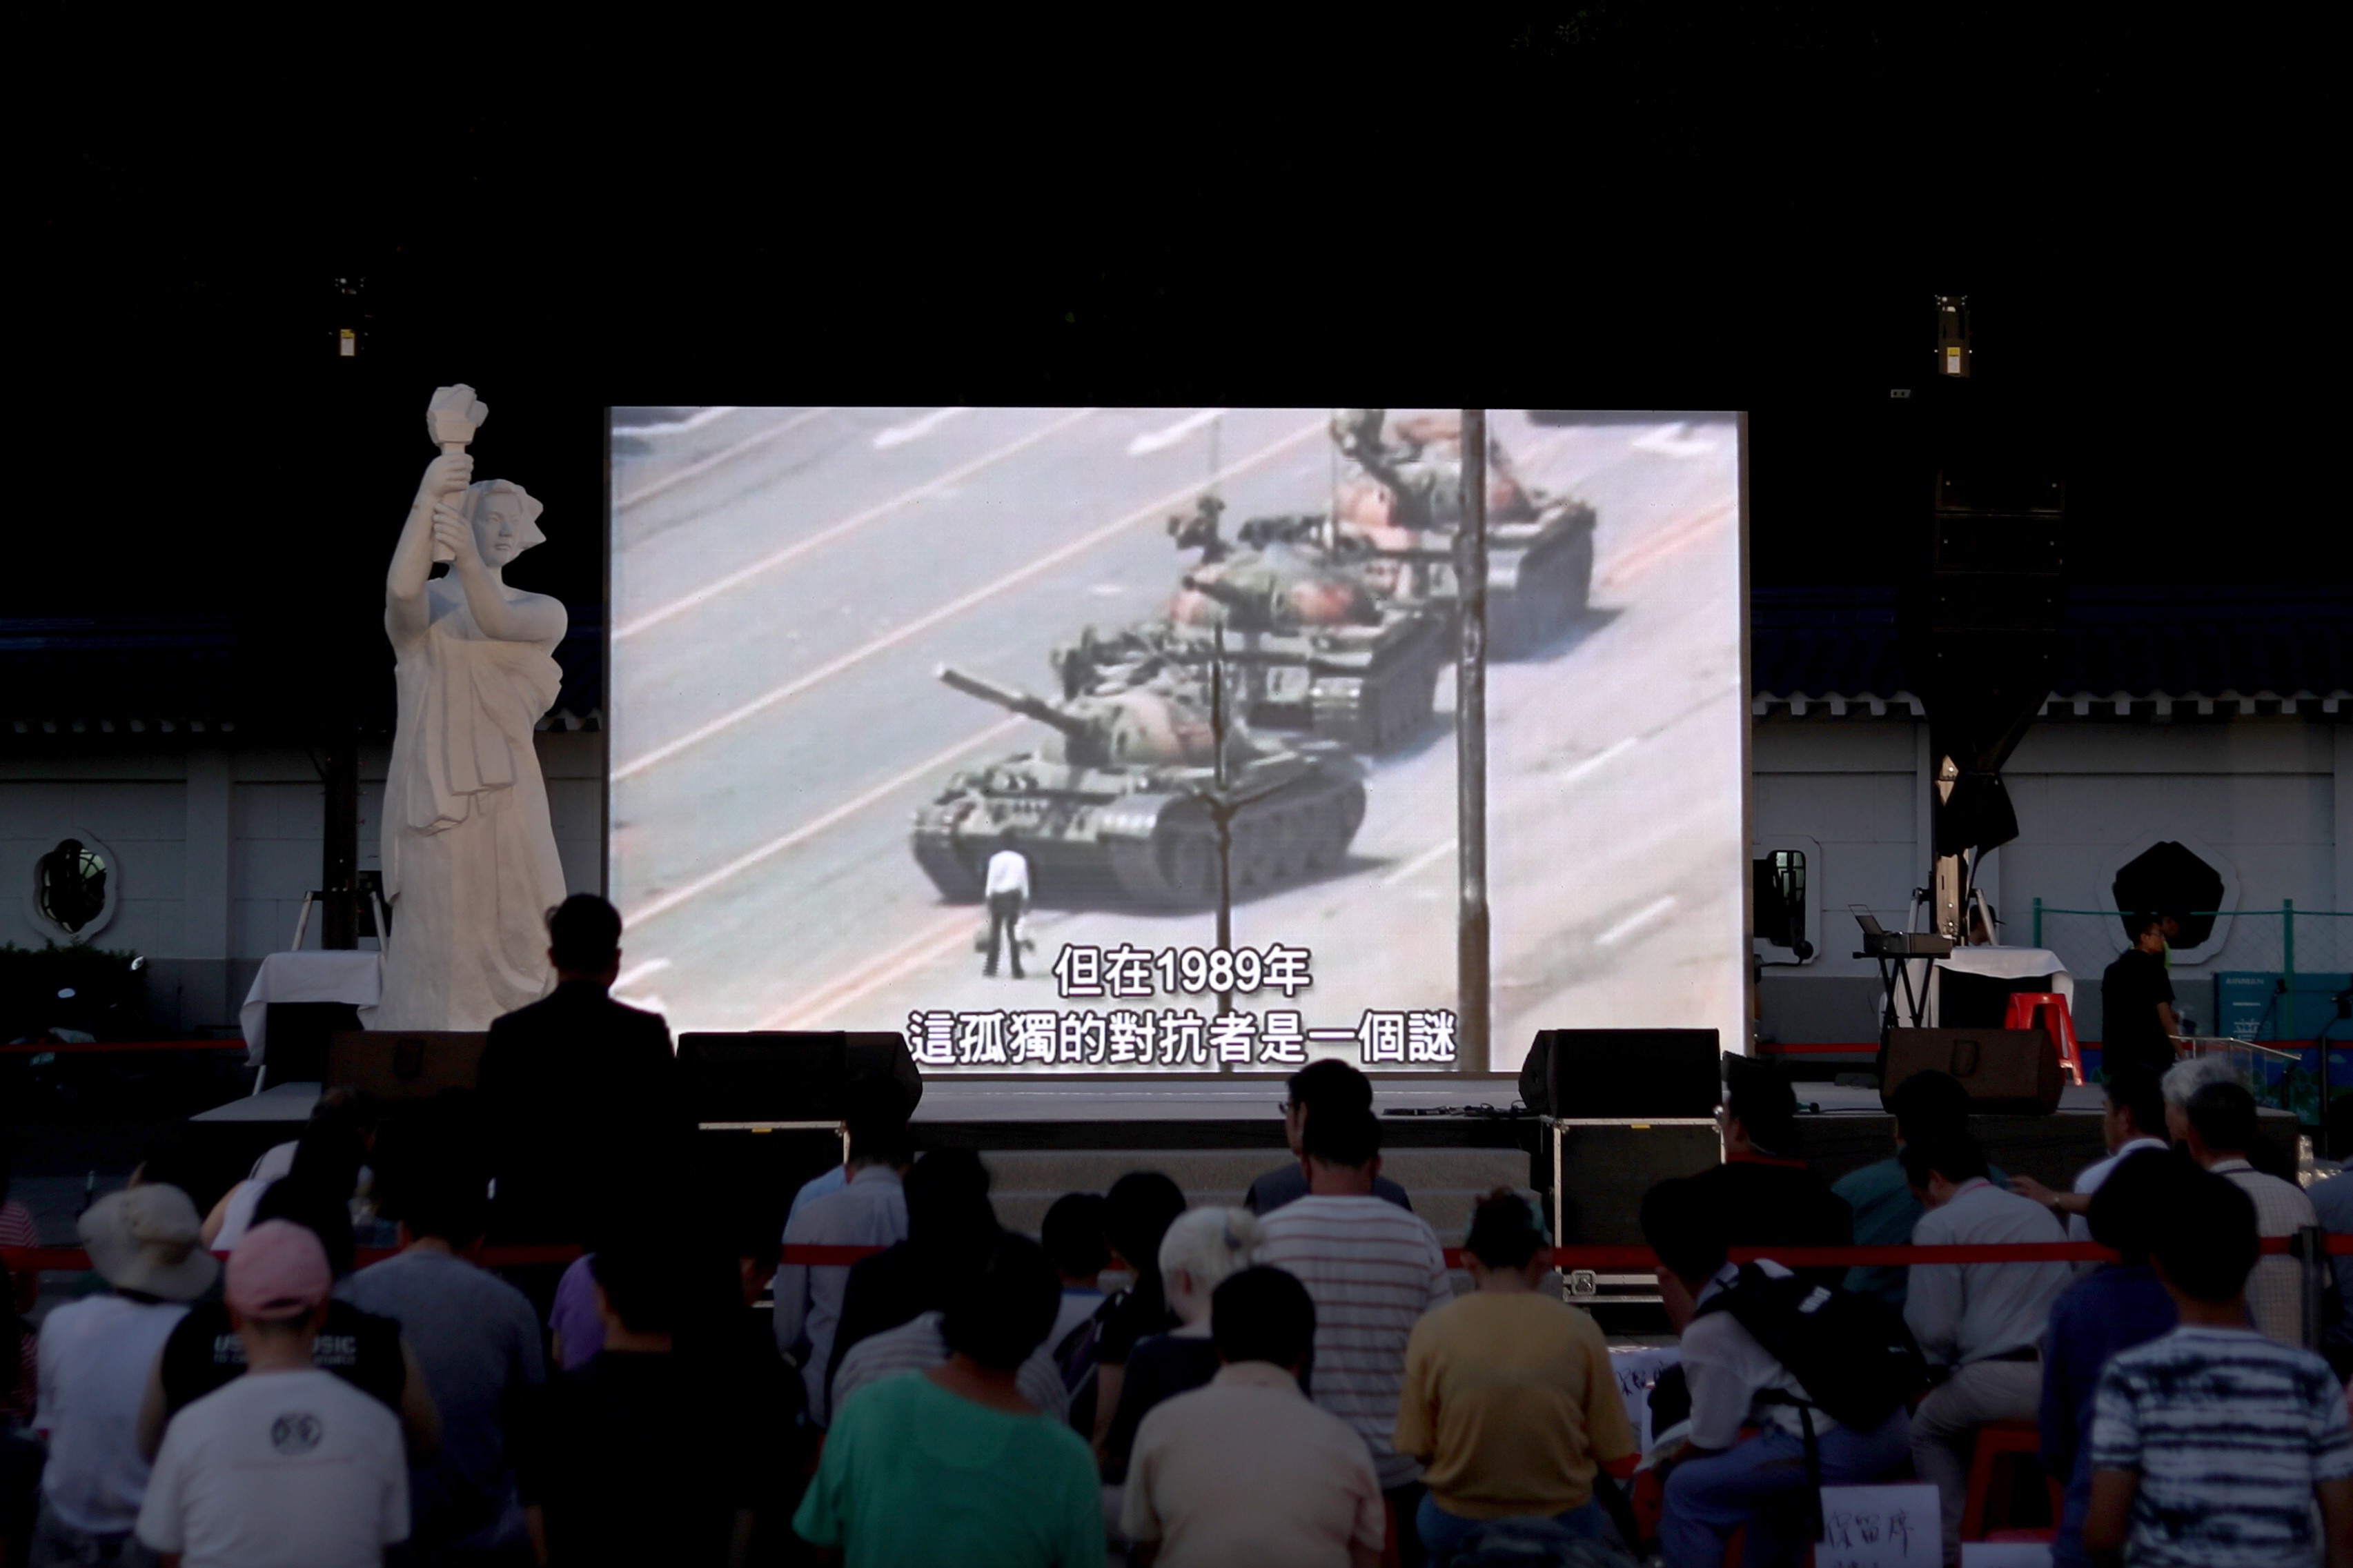 People watch a video showing ‘Tank Man’ at a vigil in Taipei on Tuesday. Photo: EPA-EFE